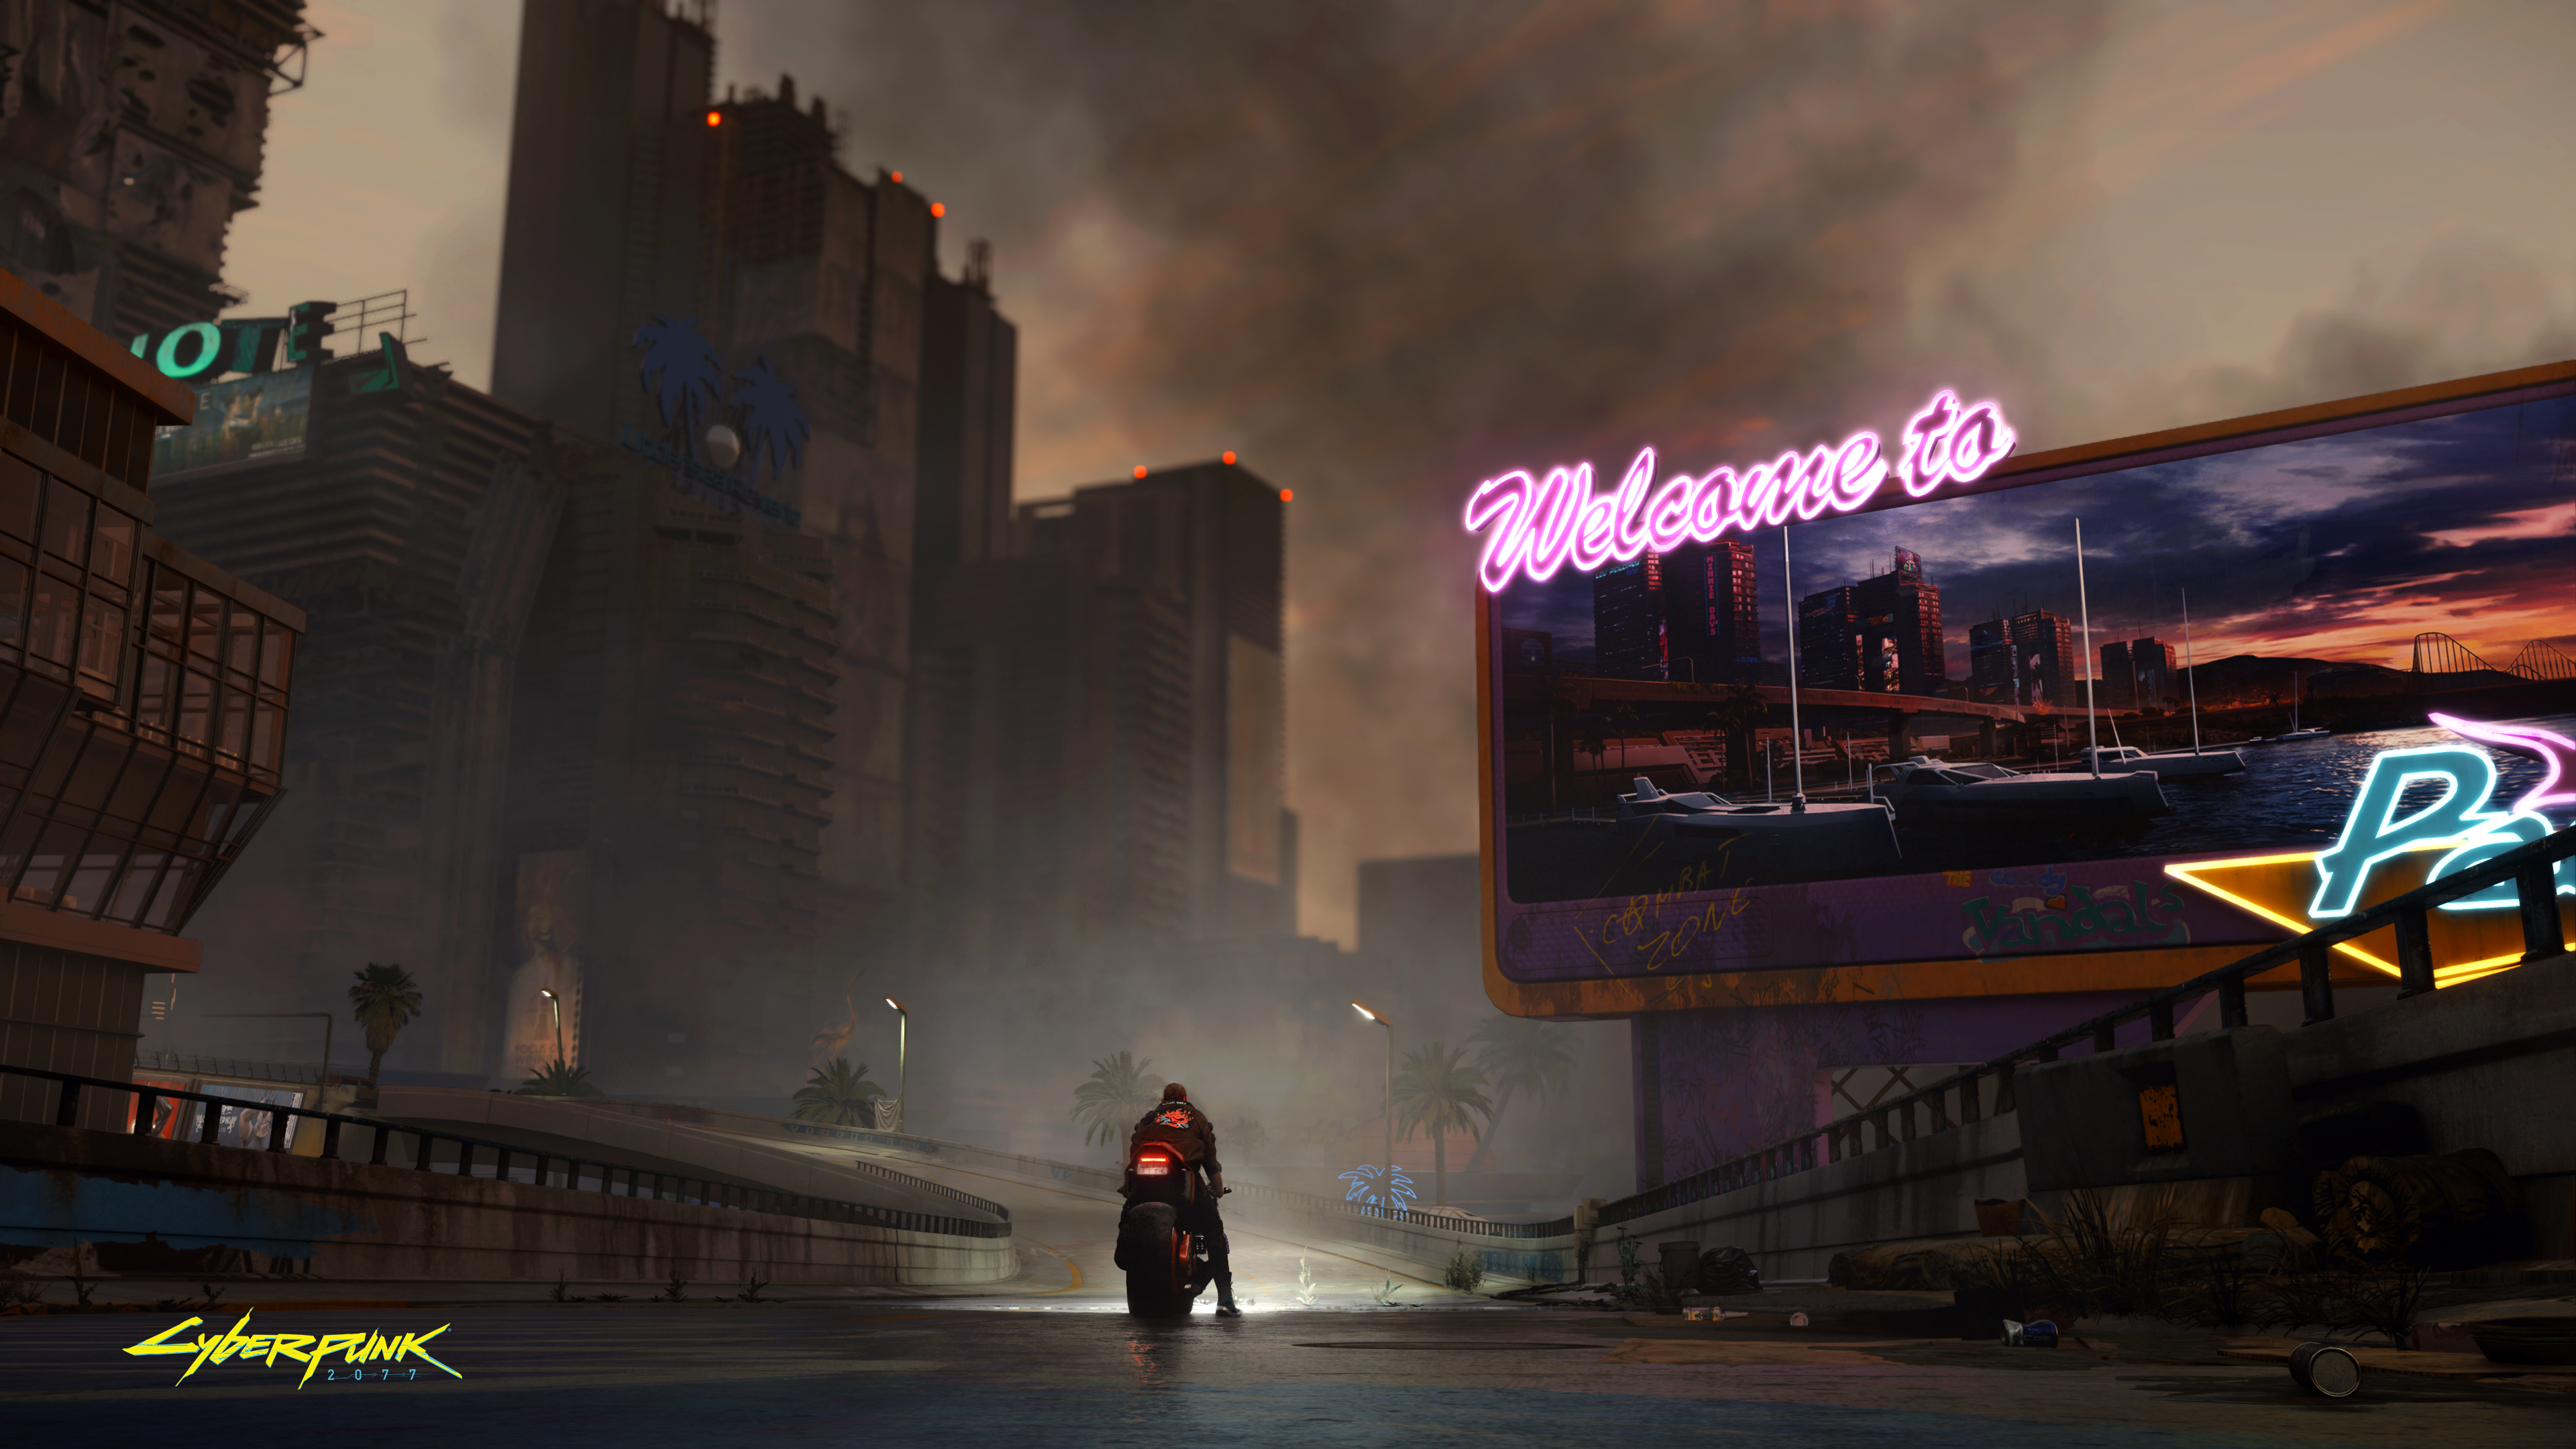 Media asset in full size related to 3dfxzone.it news item entitled as follows: NVIDIA pubblica nuovi screenshots 4K di Cyberpunk 2077 con ray-tracing | Image Name: news29734_Cyberpunk-2077-Screenshot_3.png